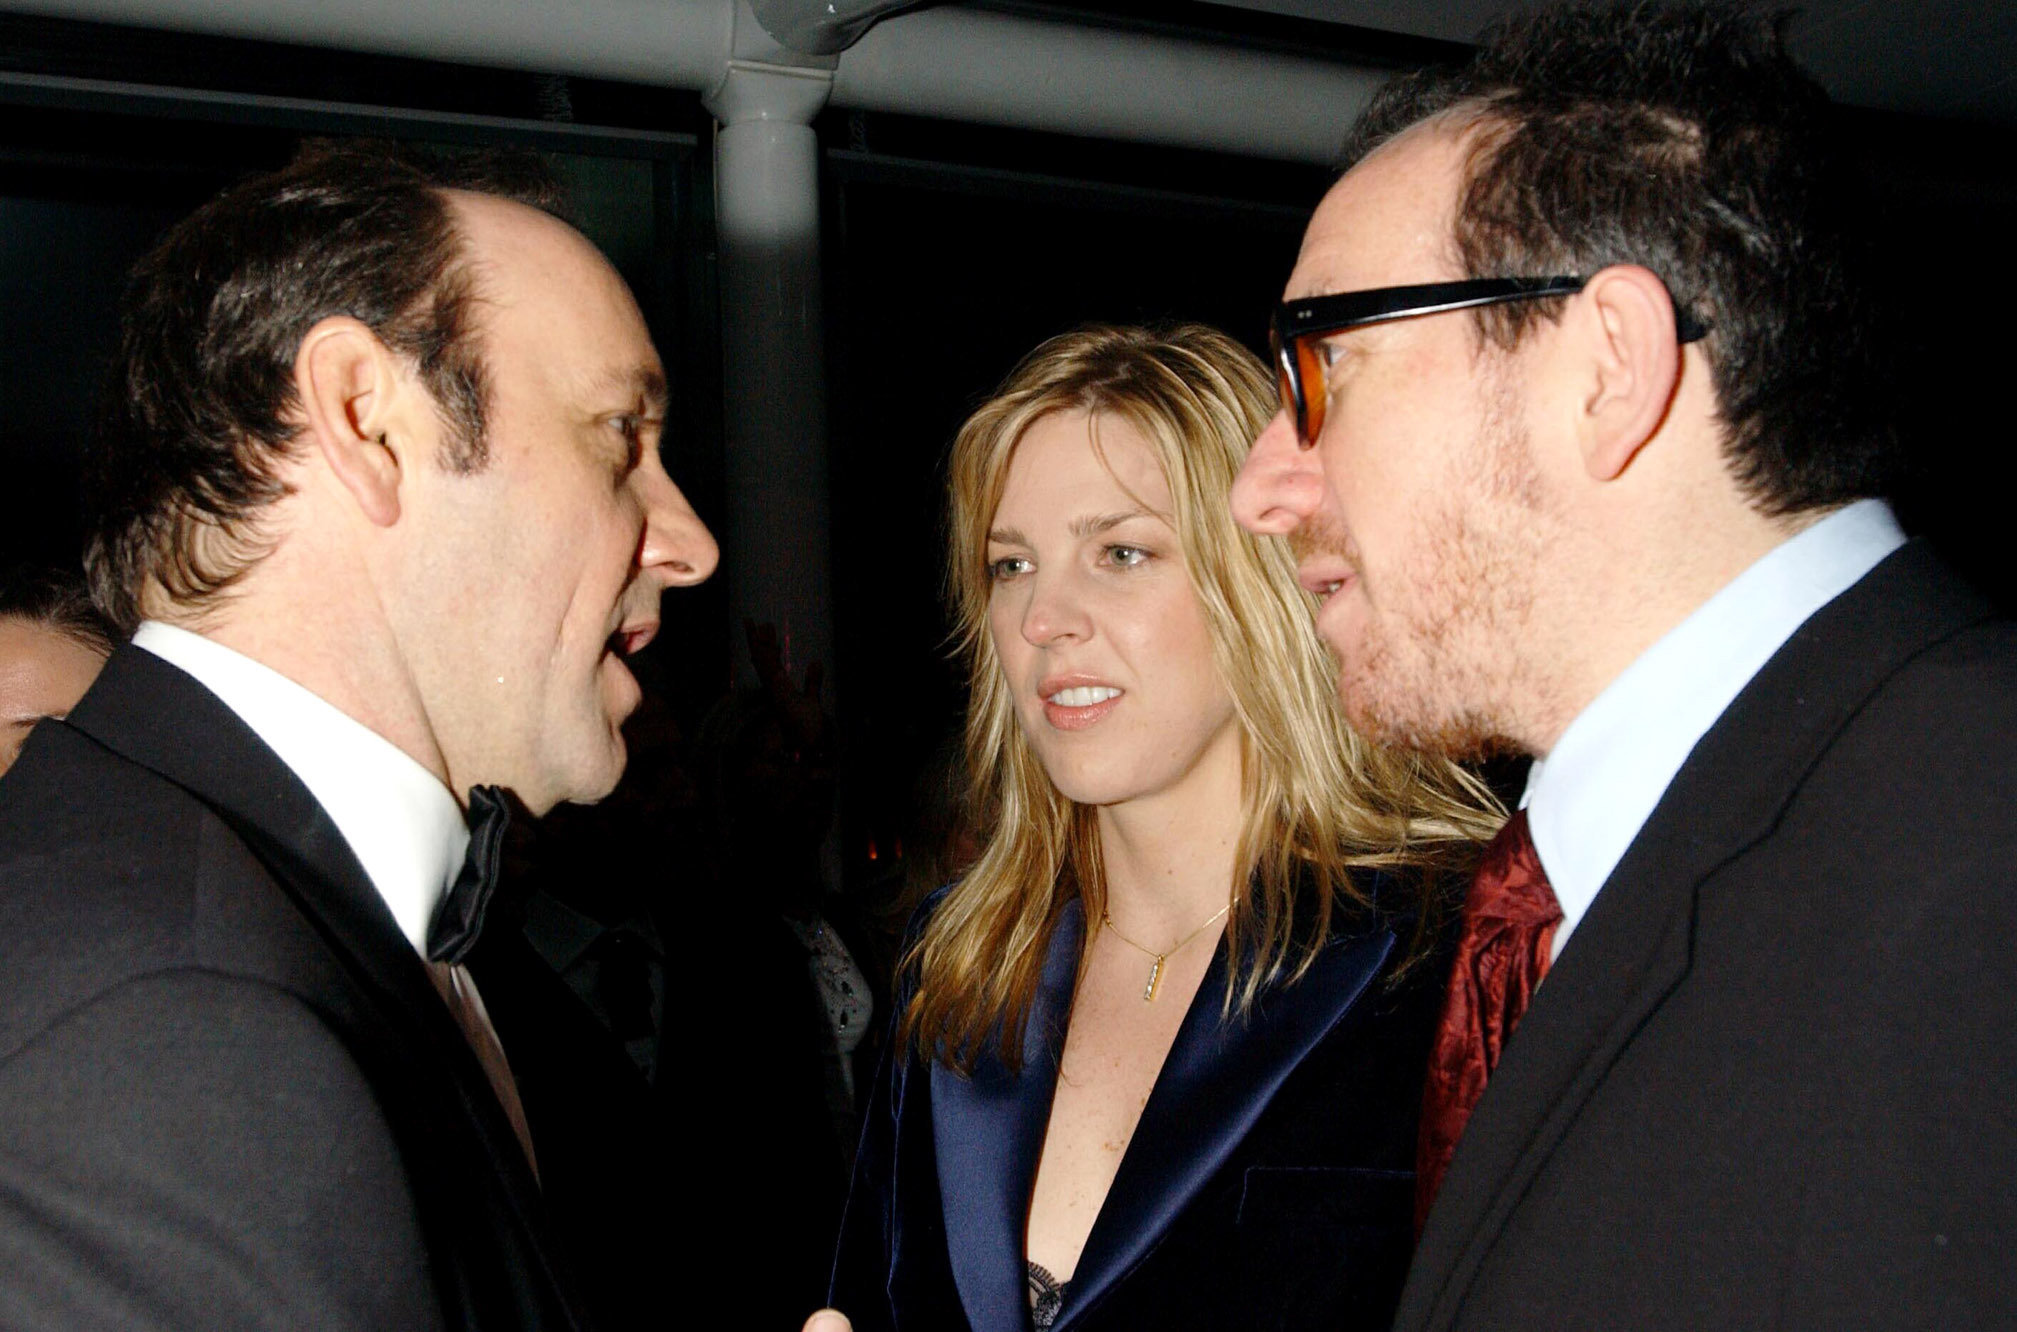 Kevin Spacey (left) at a party in London during his time as artistic director of the Old Vic